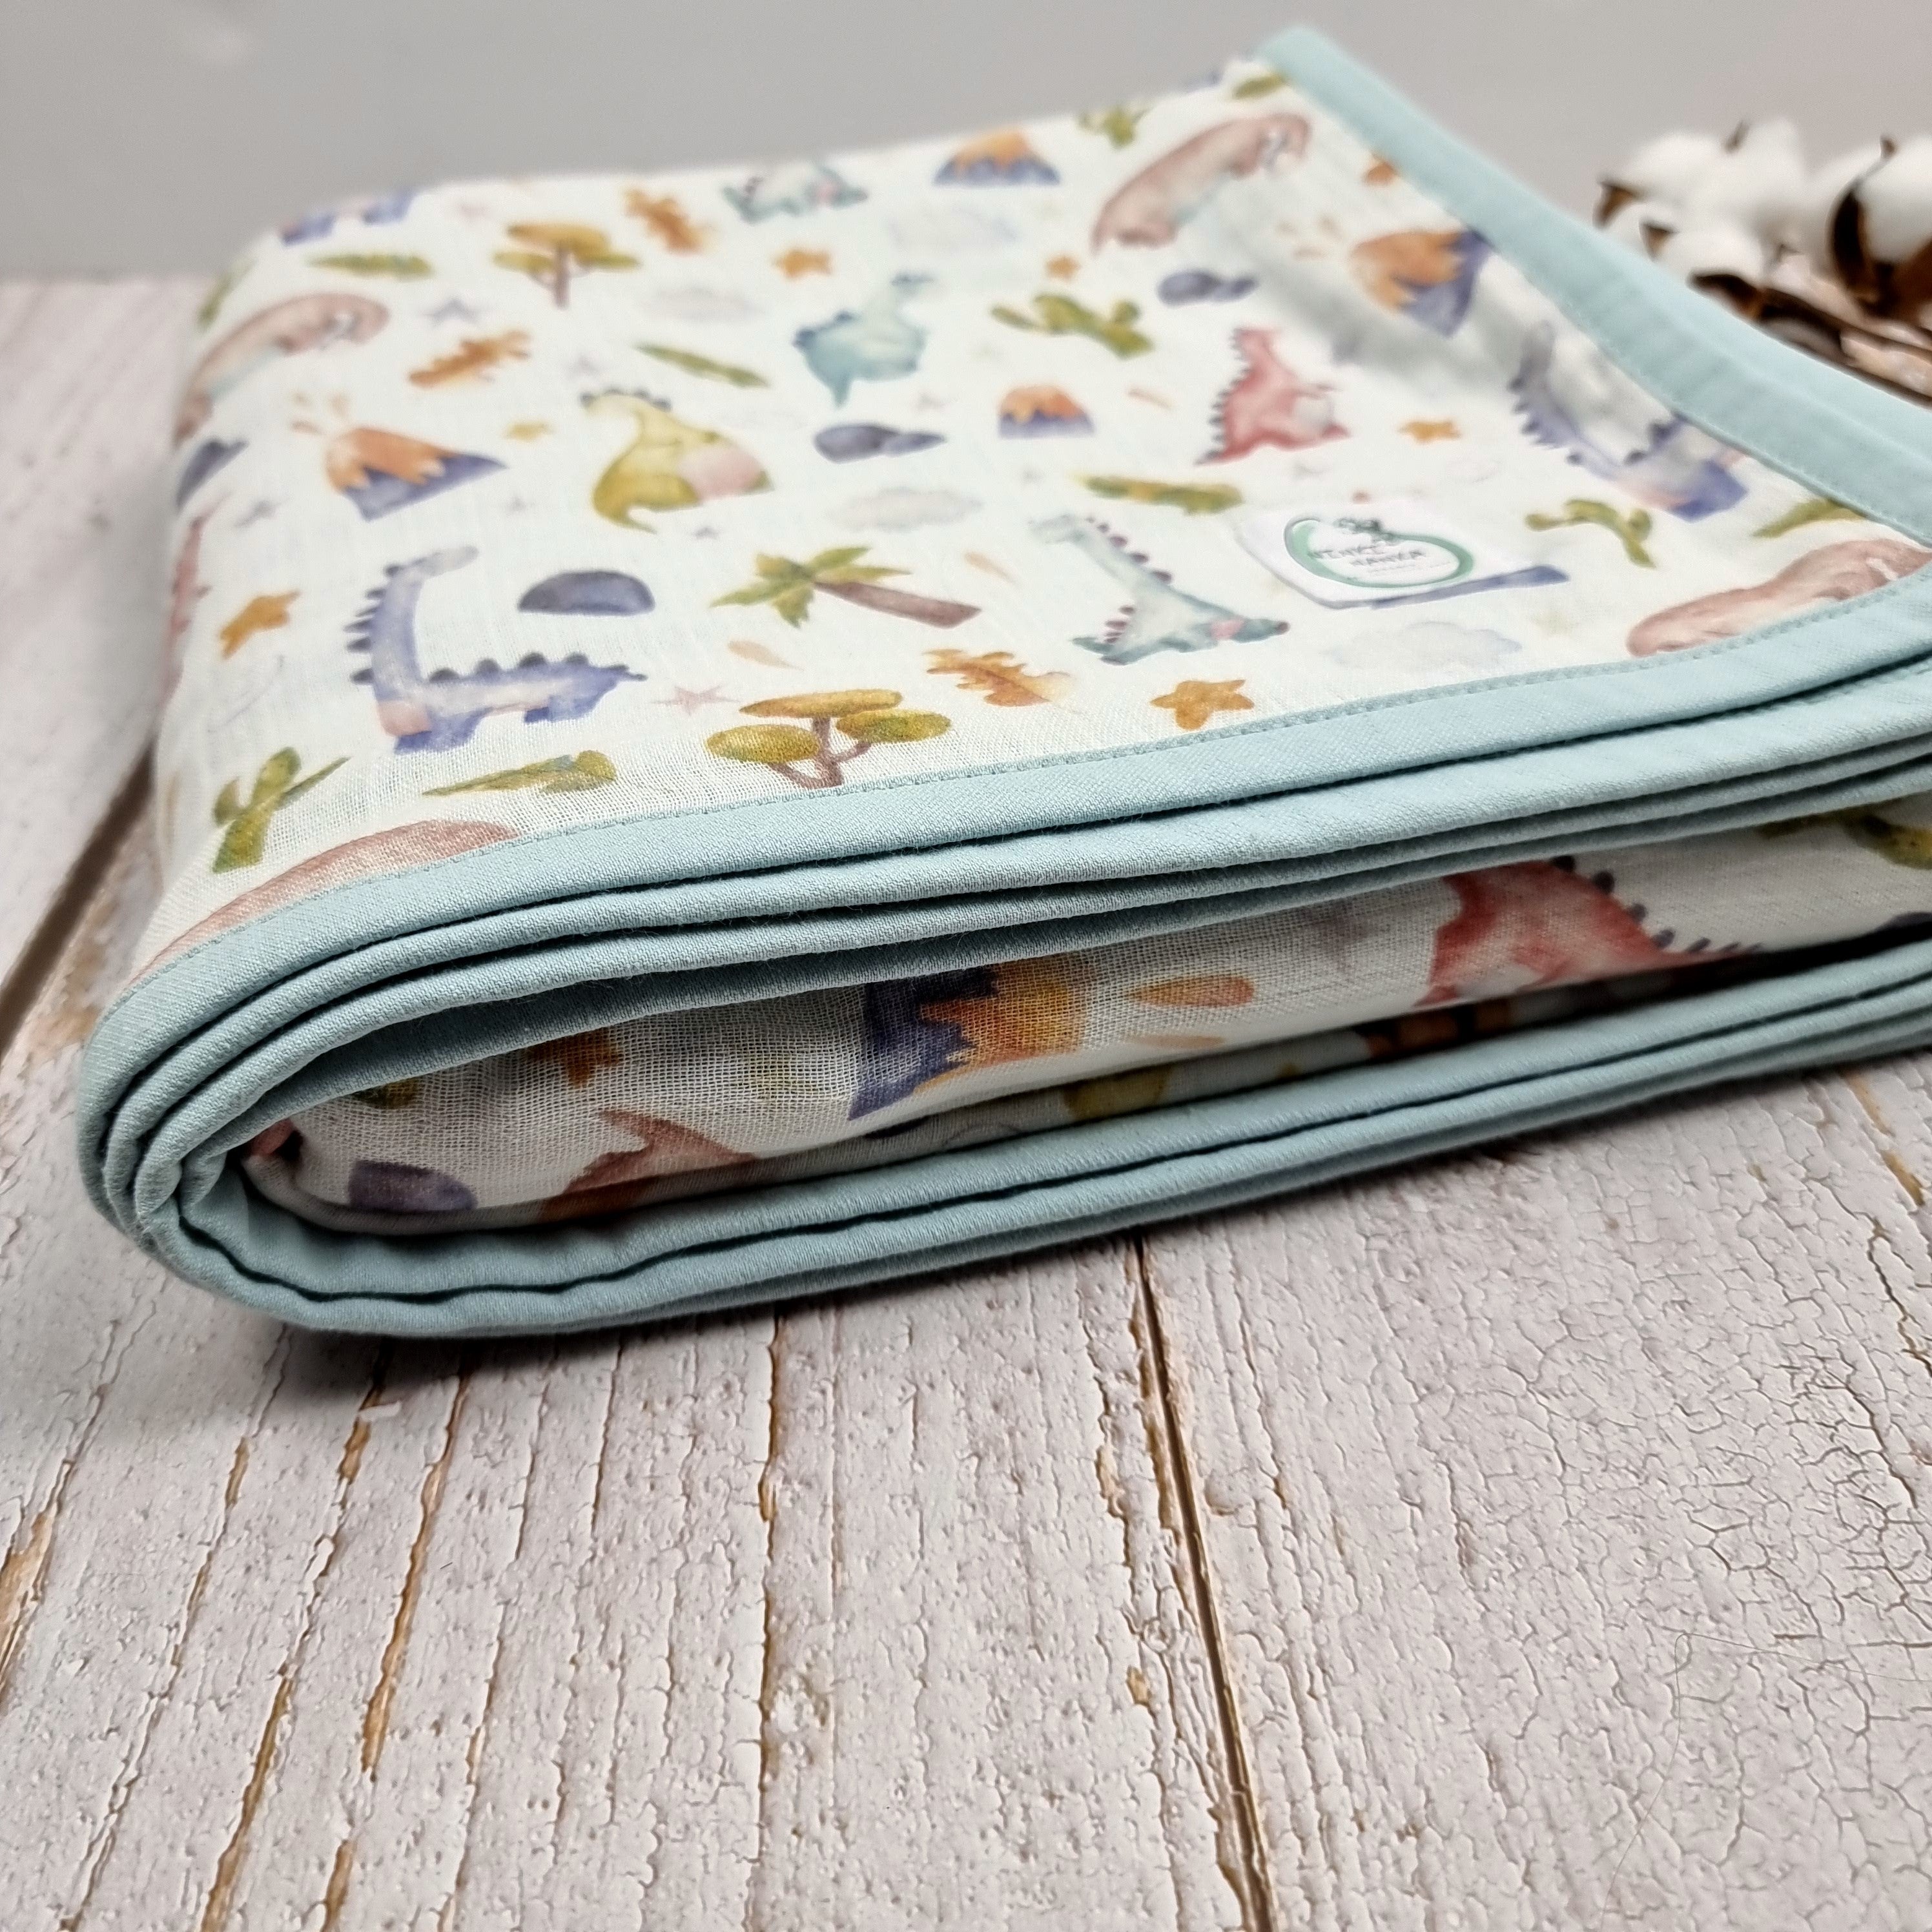 Dinosaur printed double sided organic muslin blanket for babies and toddlers. Light blue & White